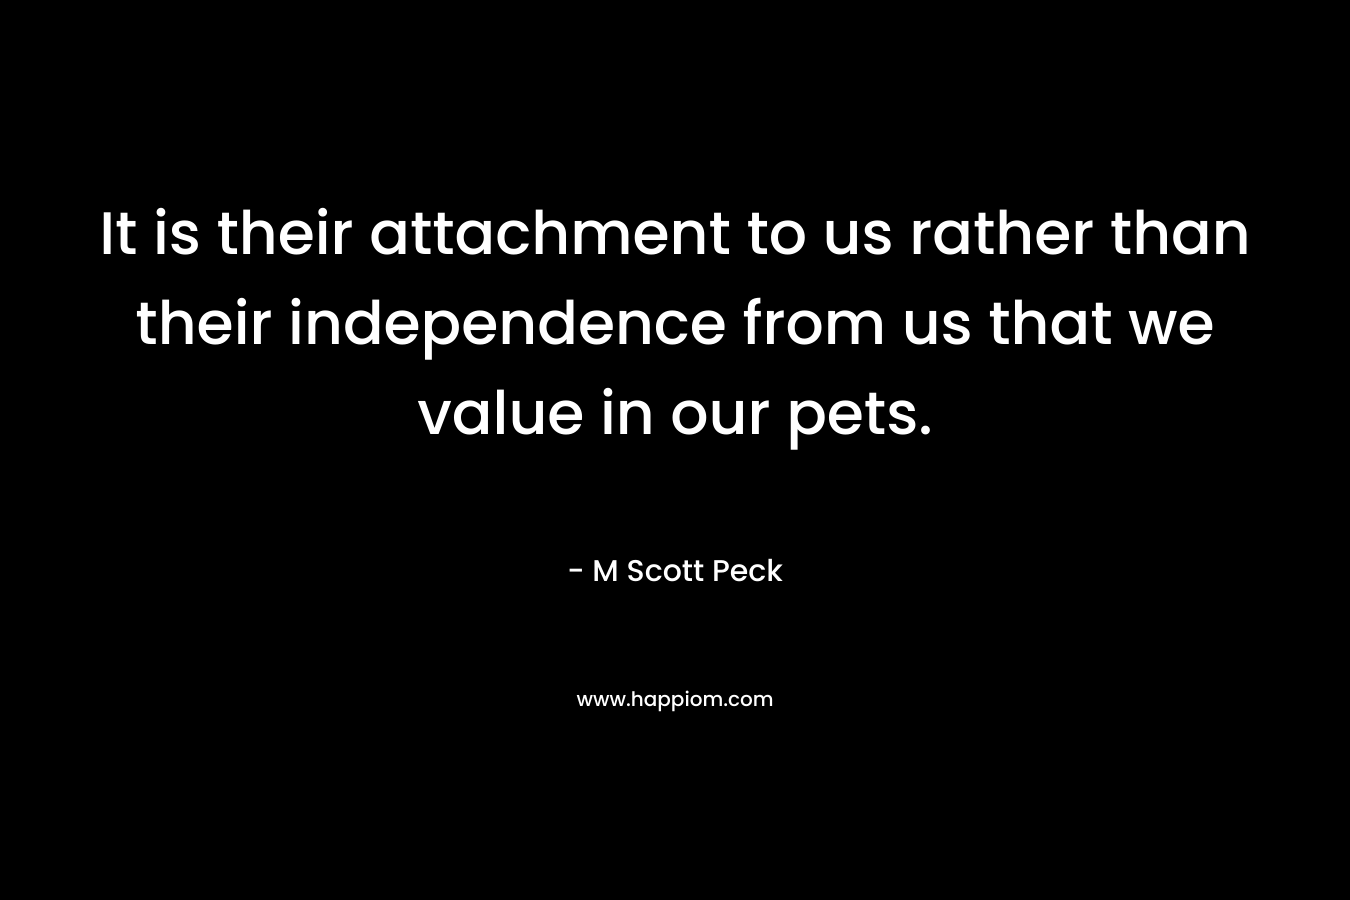 It is their attachment to us rather than their independence from us that we value in our pets.